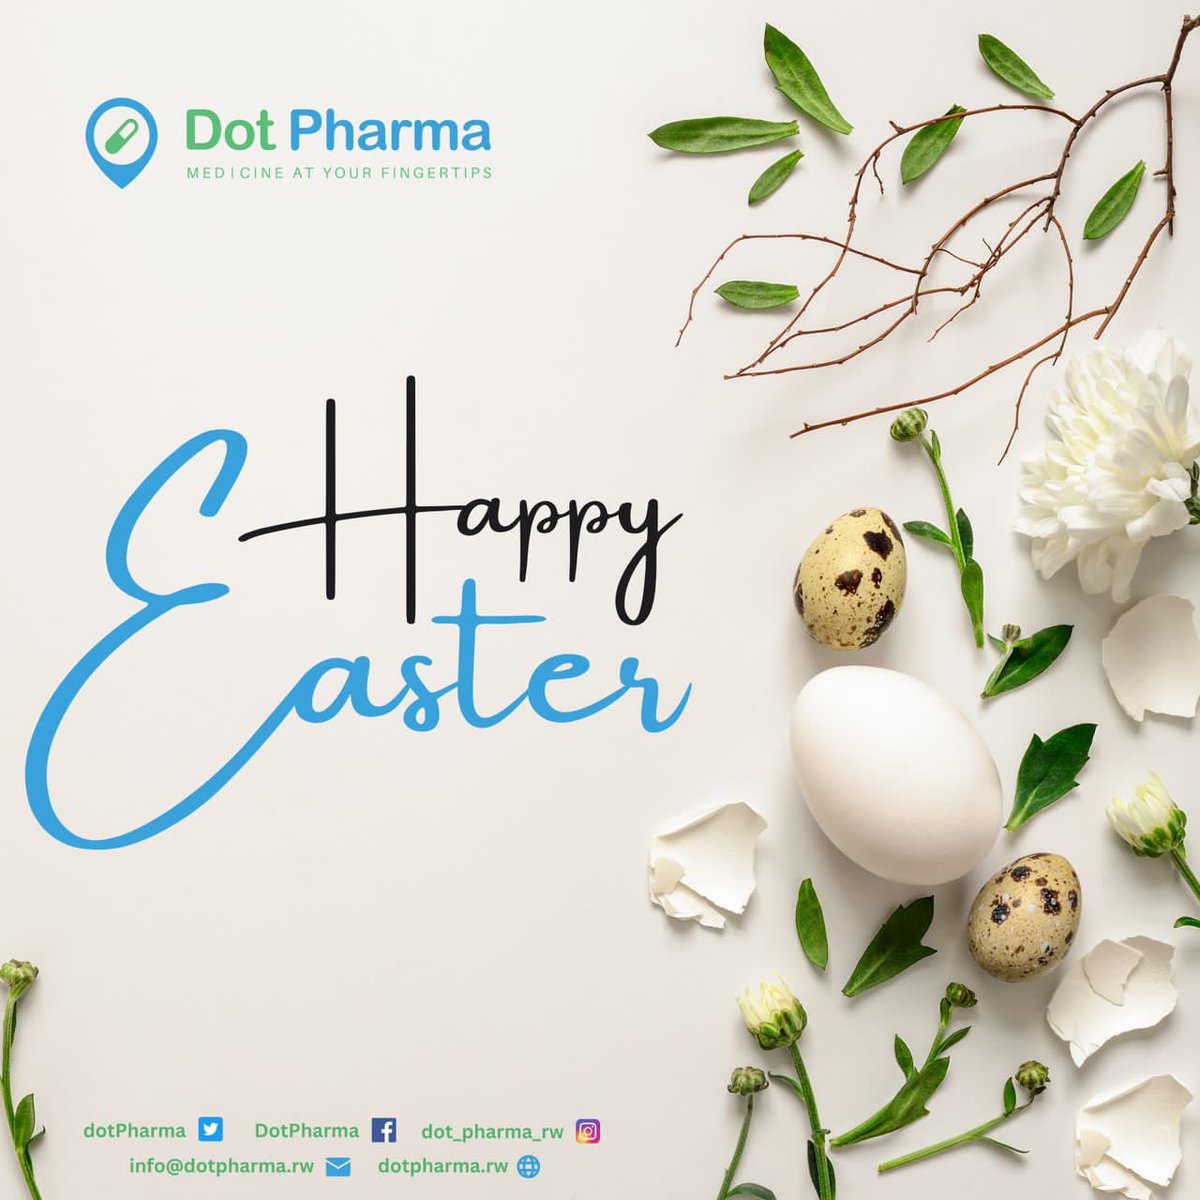 We wish you a Happy and Healthy Easter! #EasterSunday